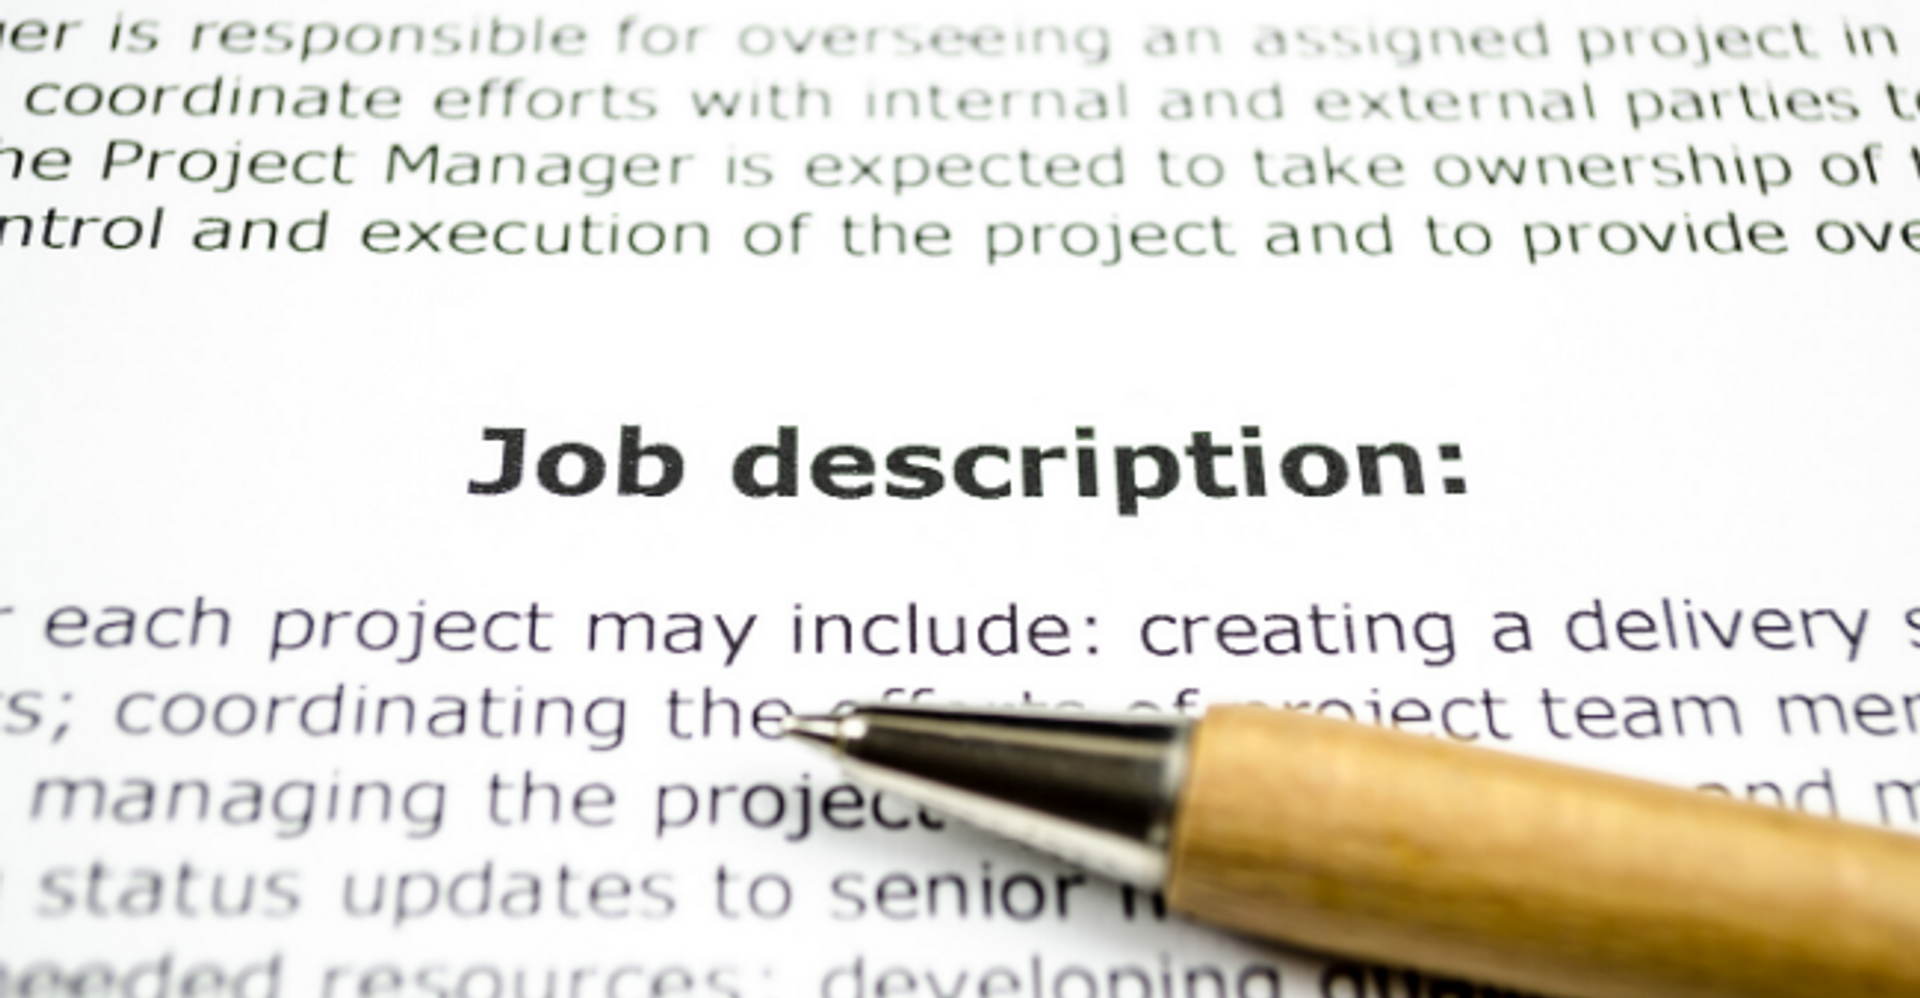 Who writes job specs, and why?